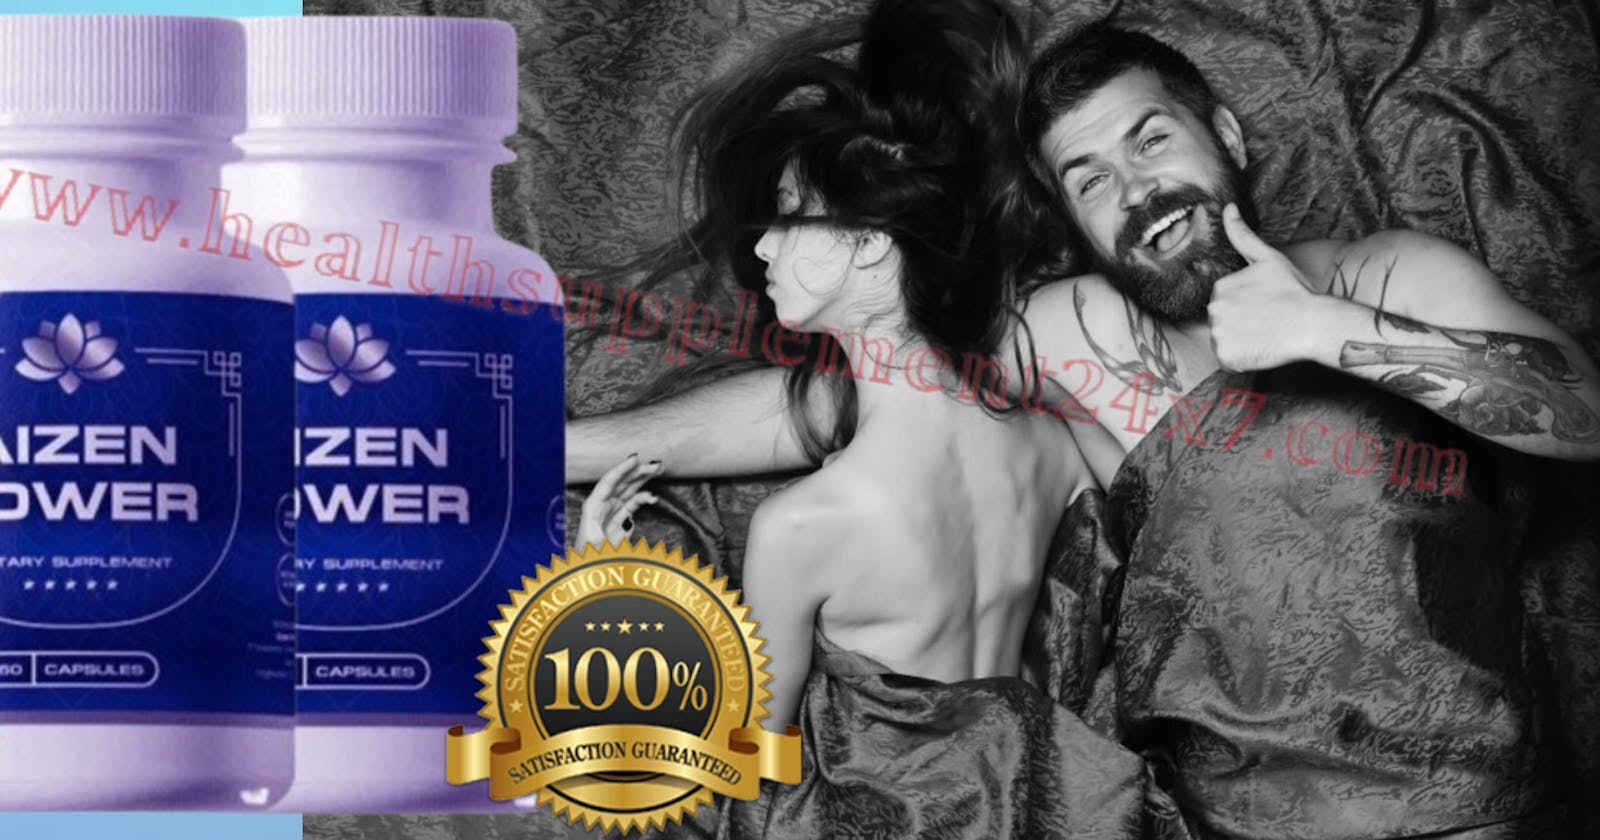 Aizen Power {Male Enhancement} Increase And Boost Sex Drive & Arousal With a Bigger Appetite[Hoax Alert]